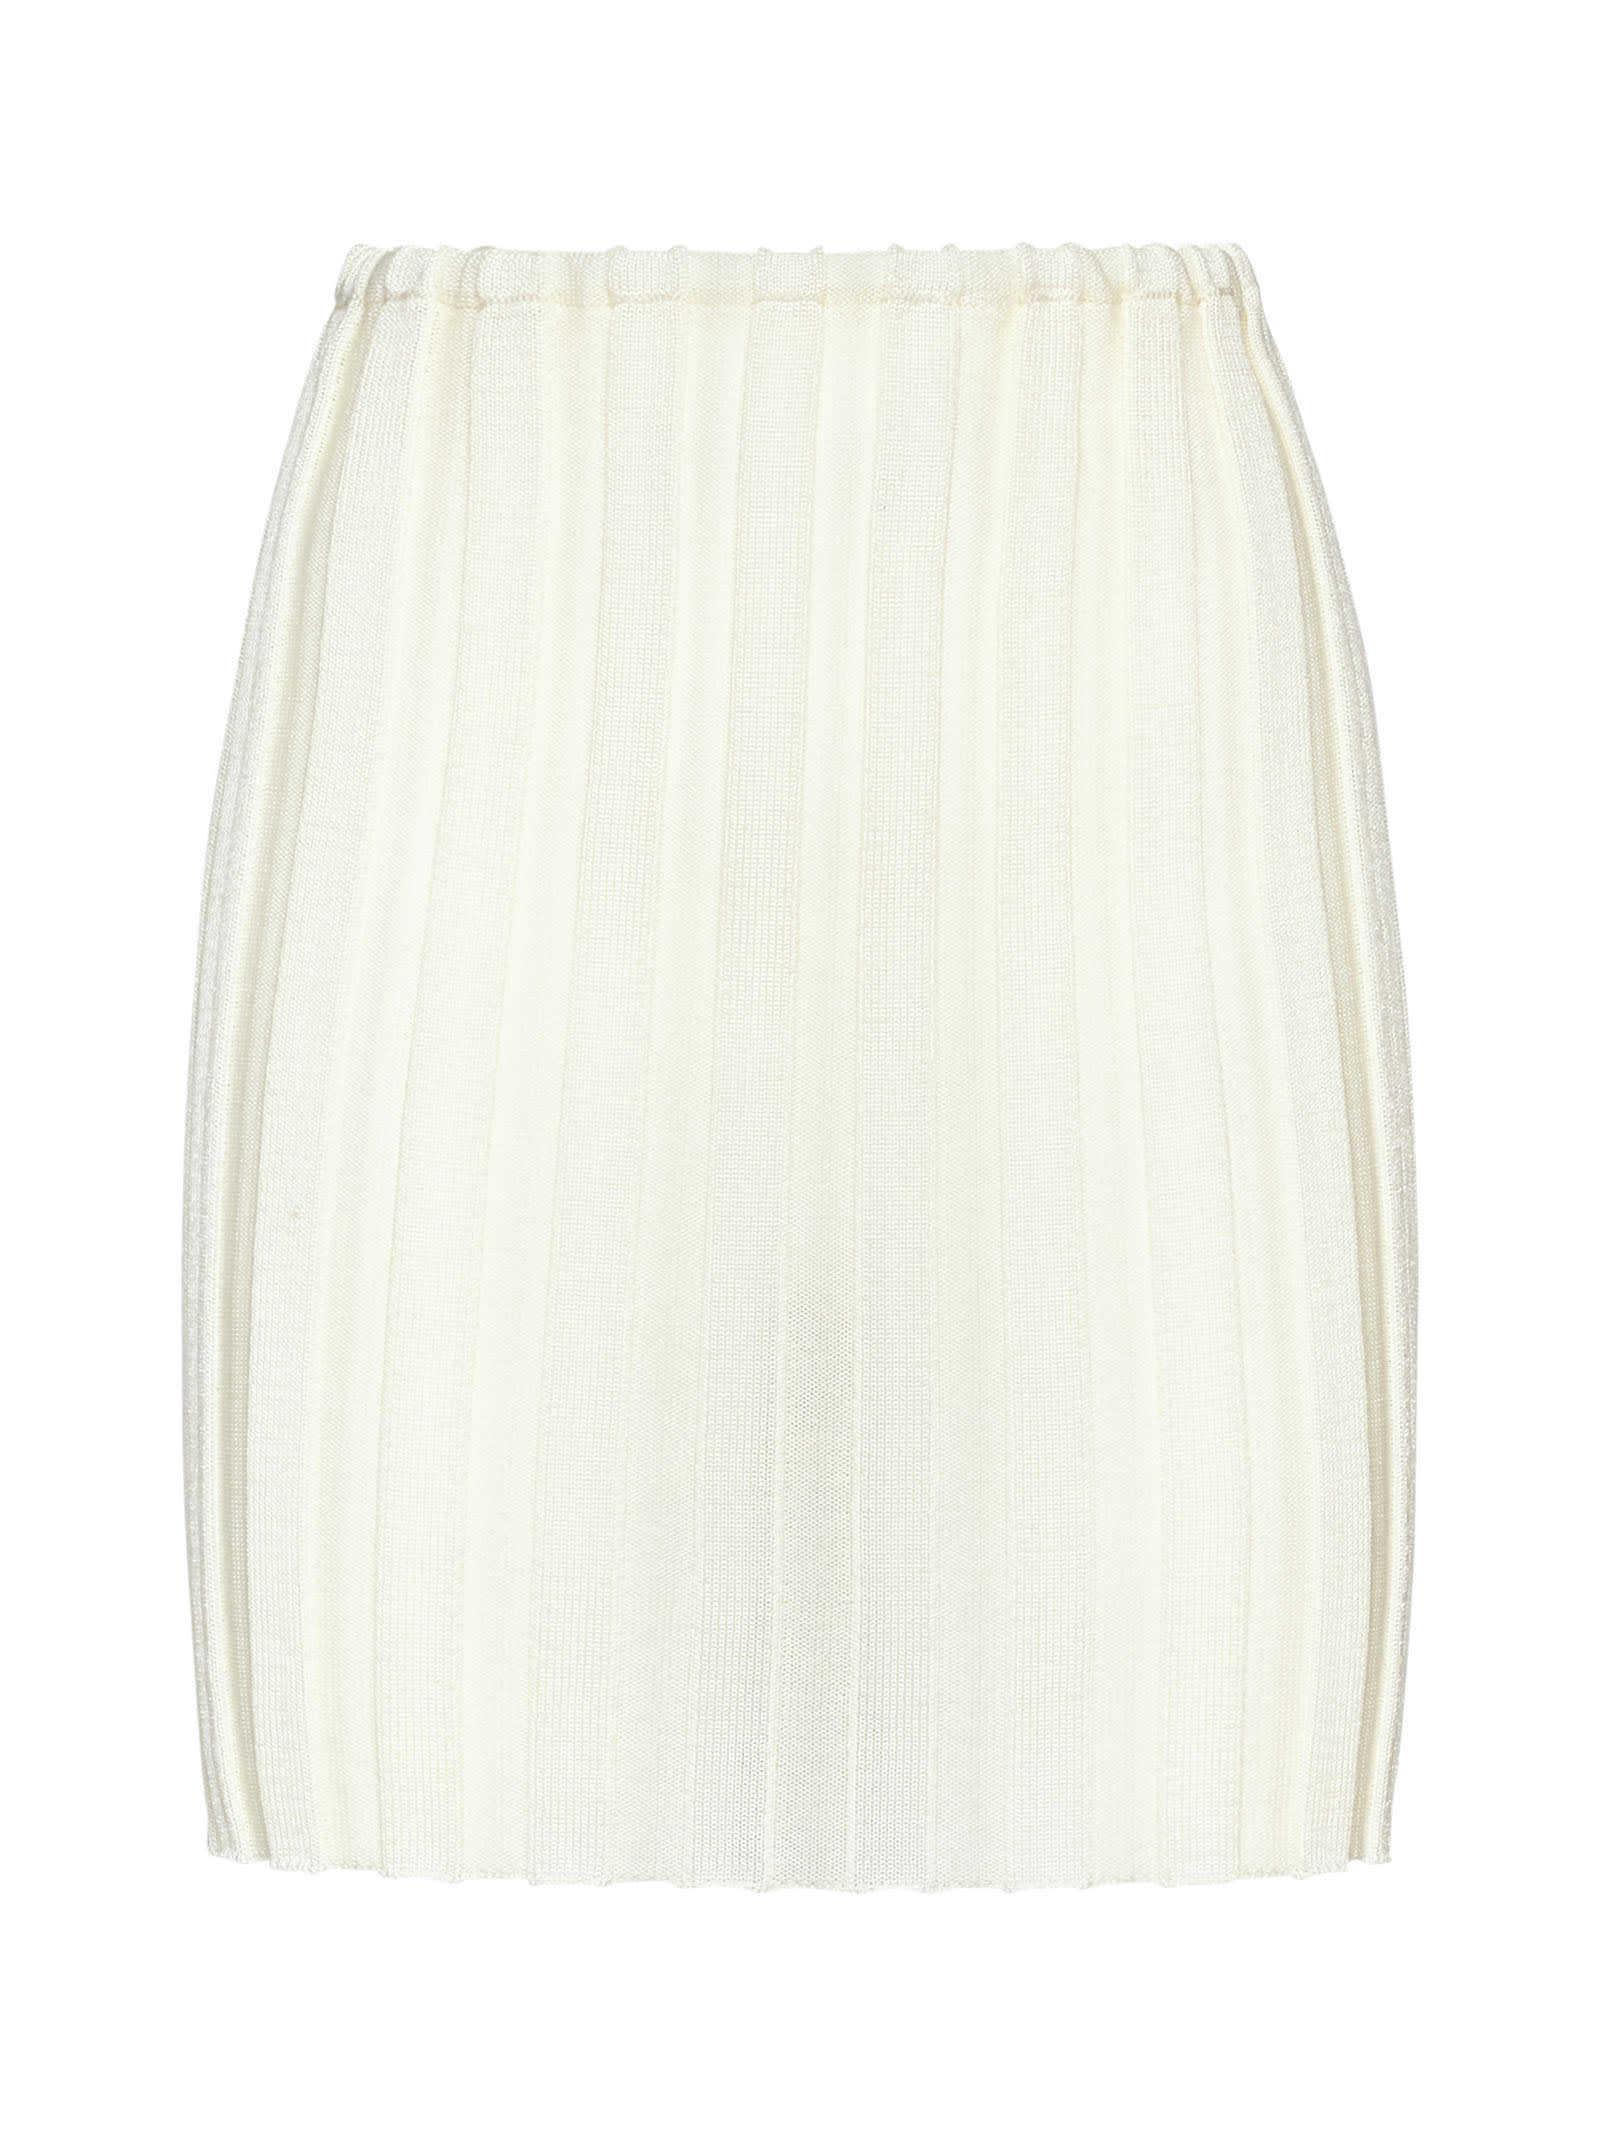 A. Roege Hove Skirt